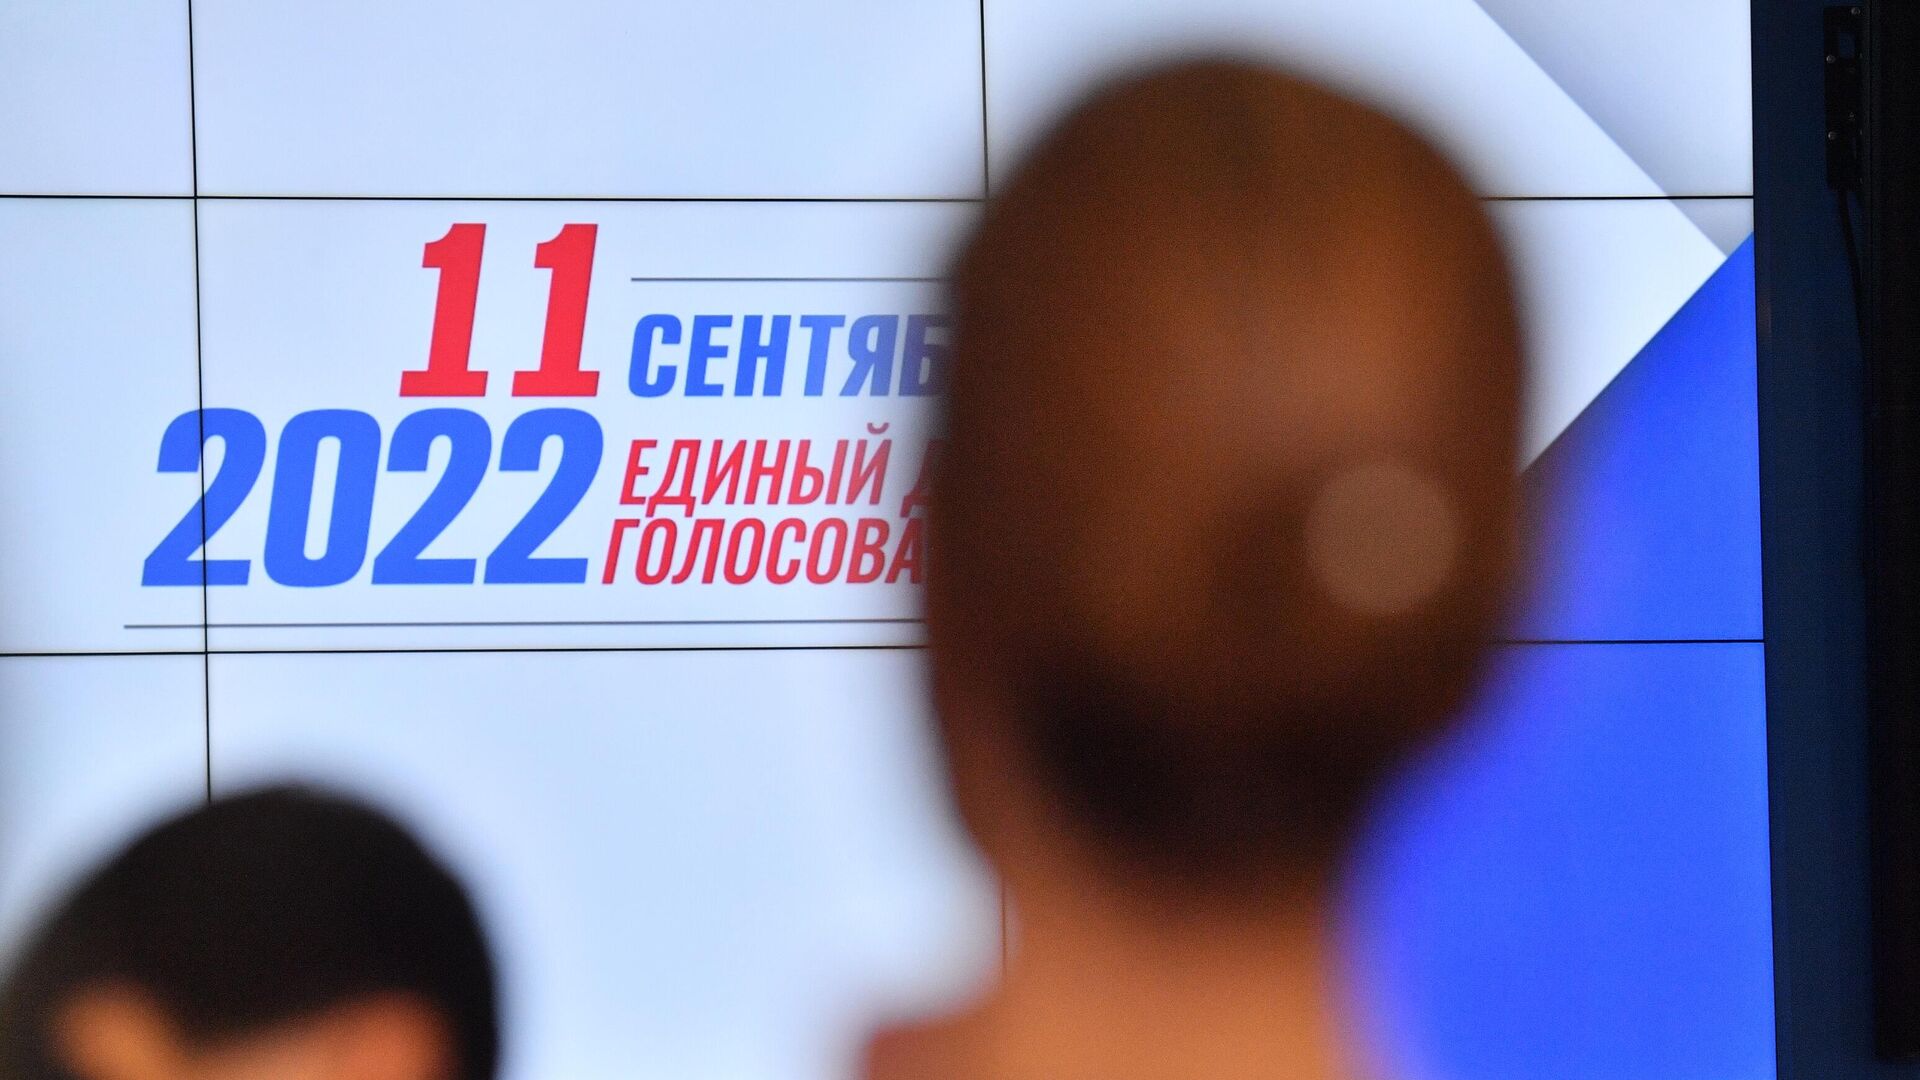 The turnout in the elections held in the Yaroslavl region was 19.14 percent at 12:00.